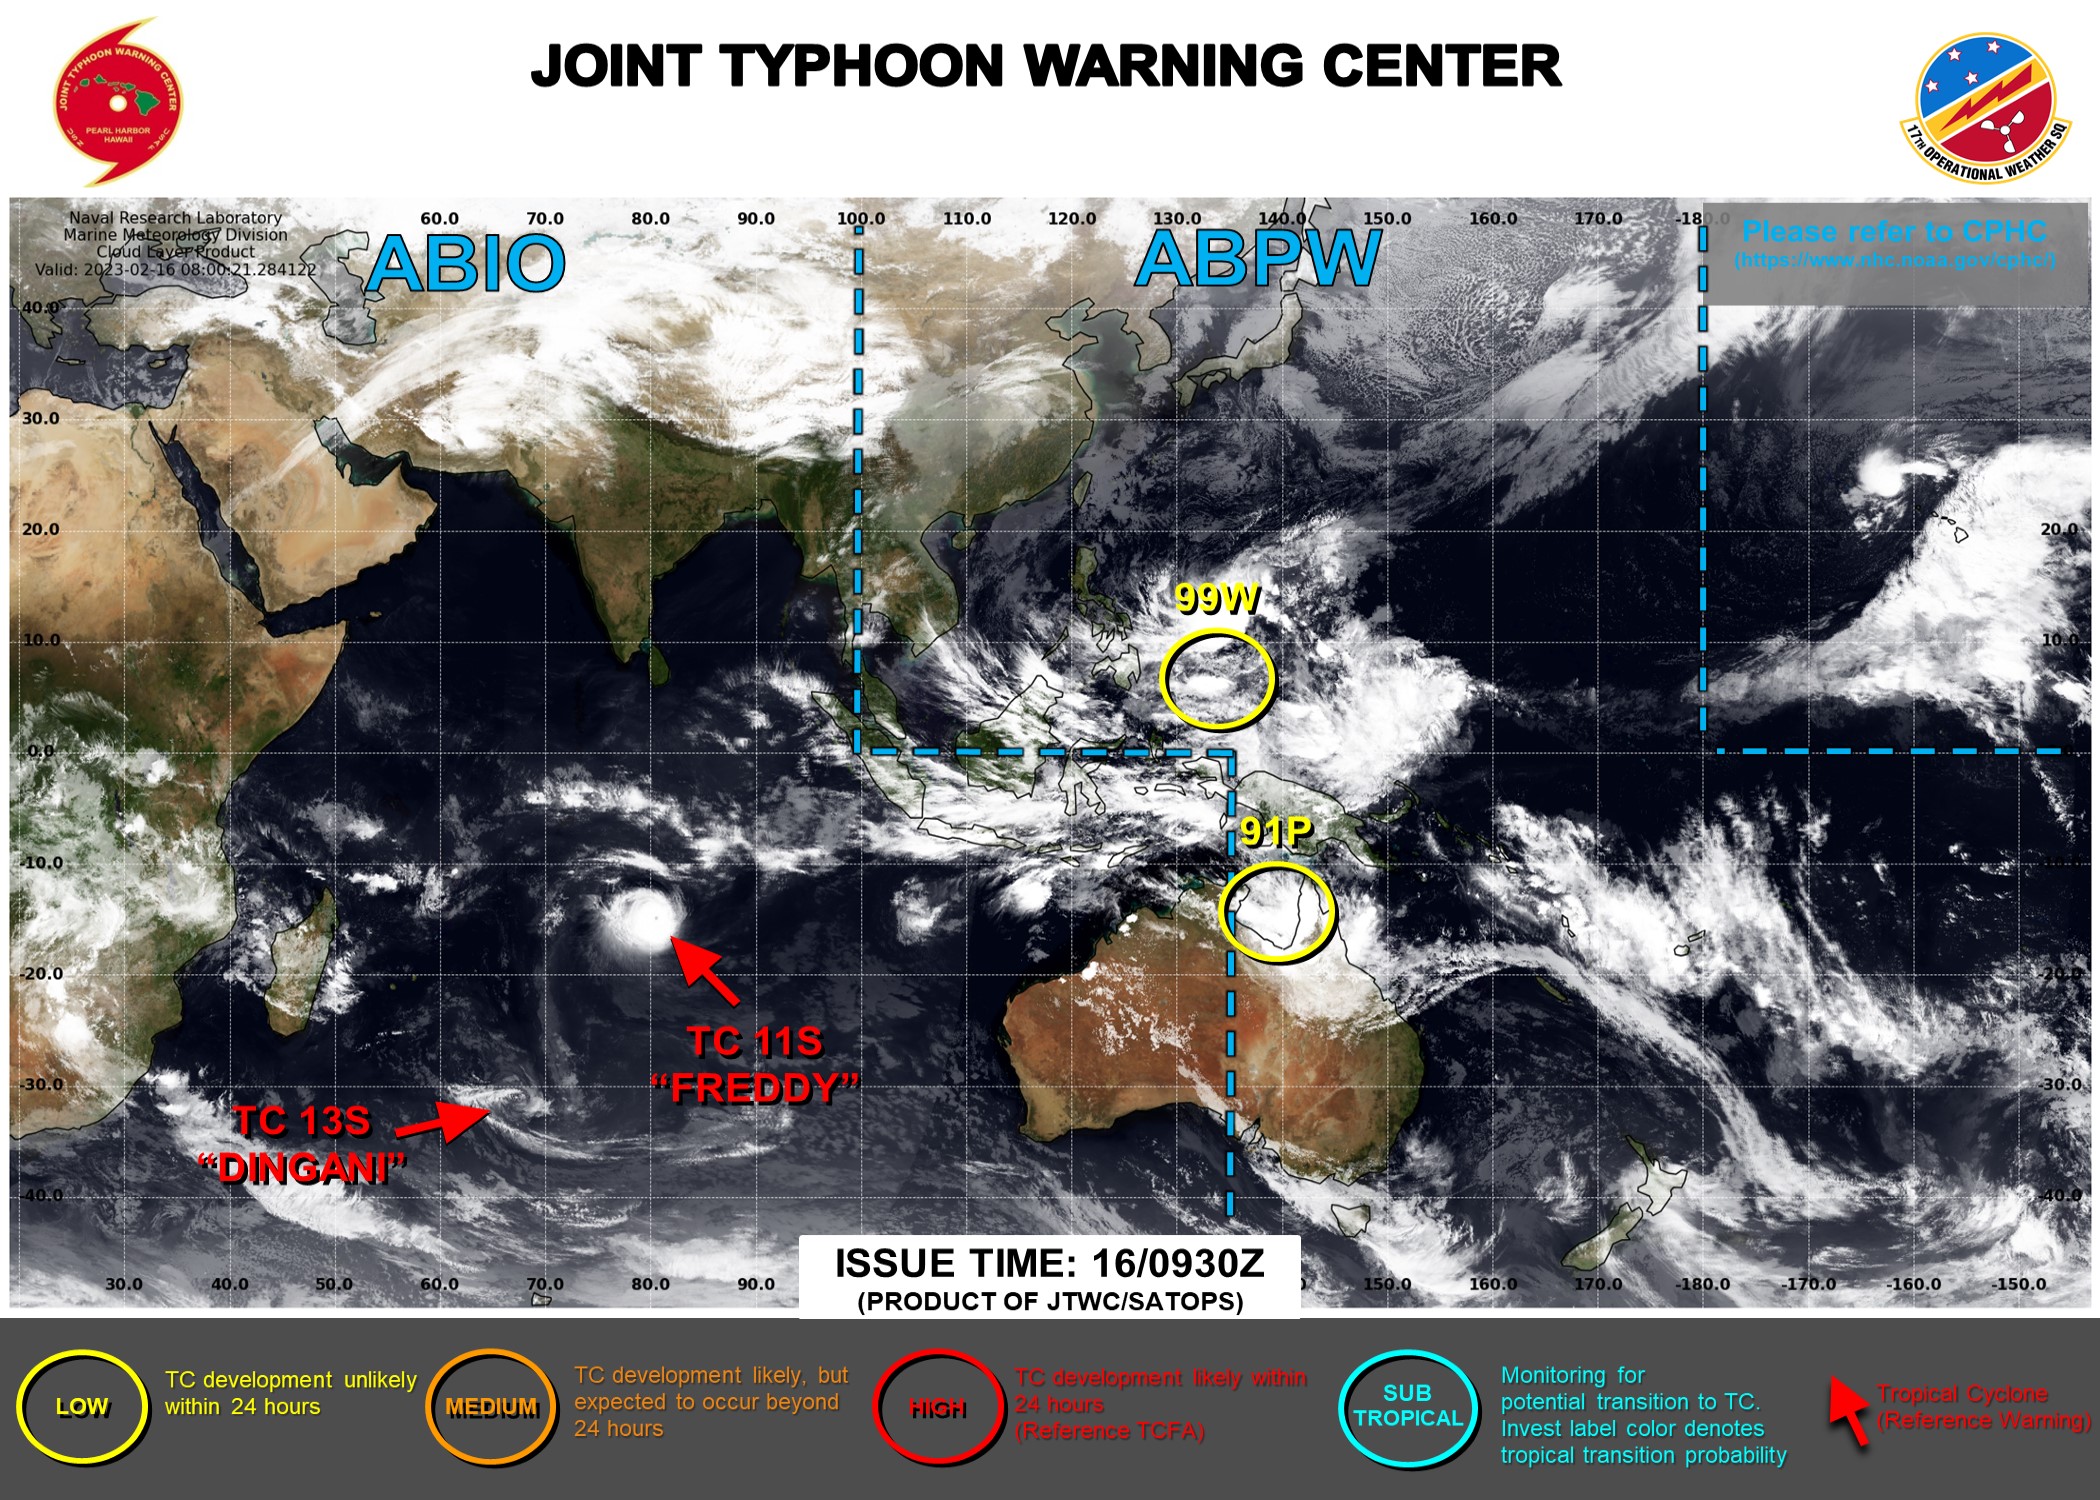 JTWC IS ISSUING 12HOURLY WARNINGS ON TC 11S(FREDDY). 3HOURLY SATELLITE BULLETINS ARE ISSUED ON 11S, 13S AND INVEST 91P.